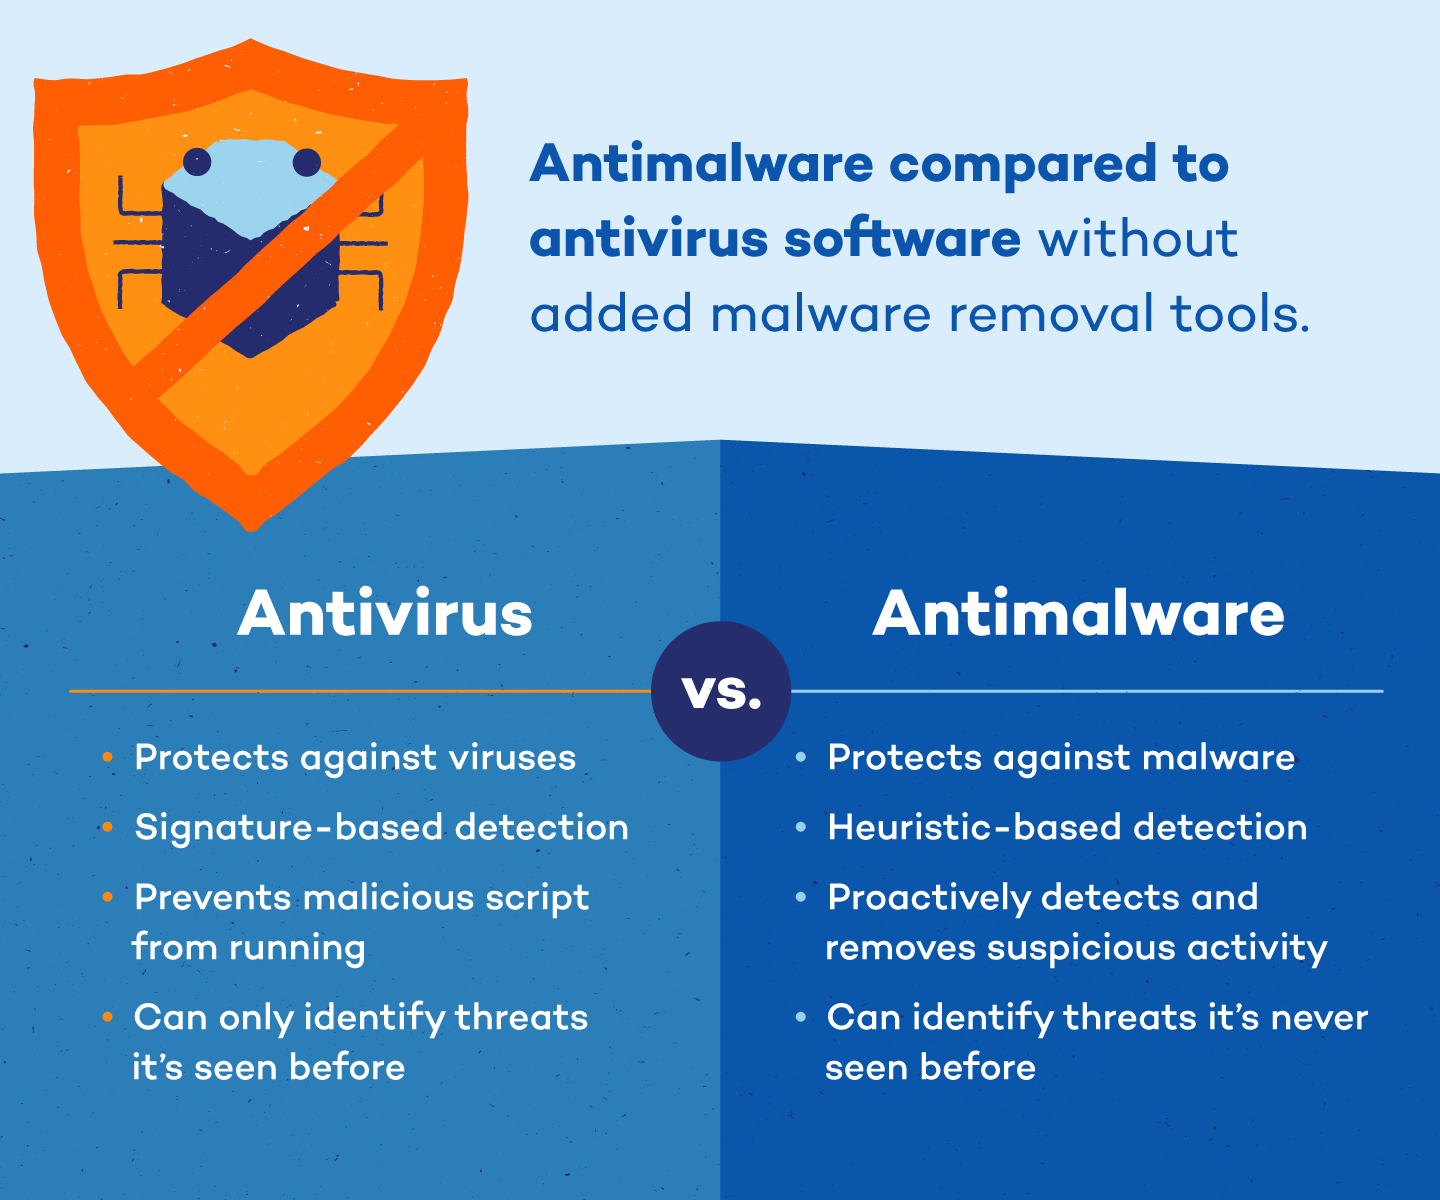 Install a reputable antivirus or antimalware program if you don't have one already.
Update the antivirus/antimalware program to ensure it has the latest virus definitions.